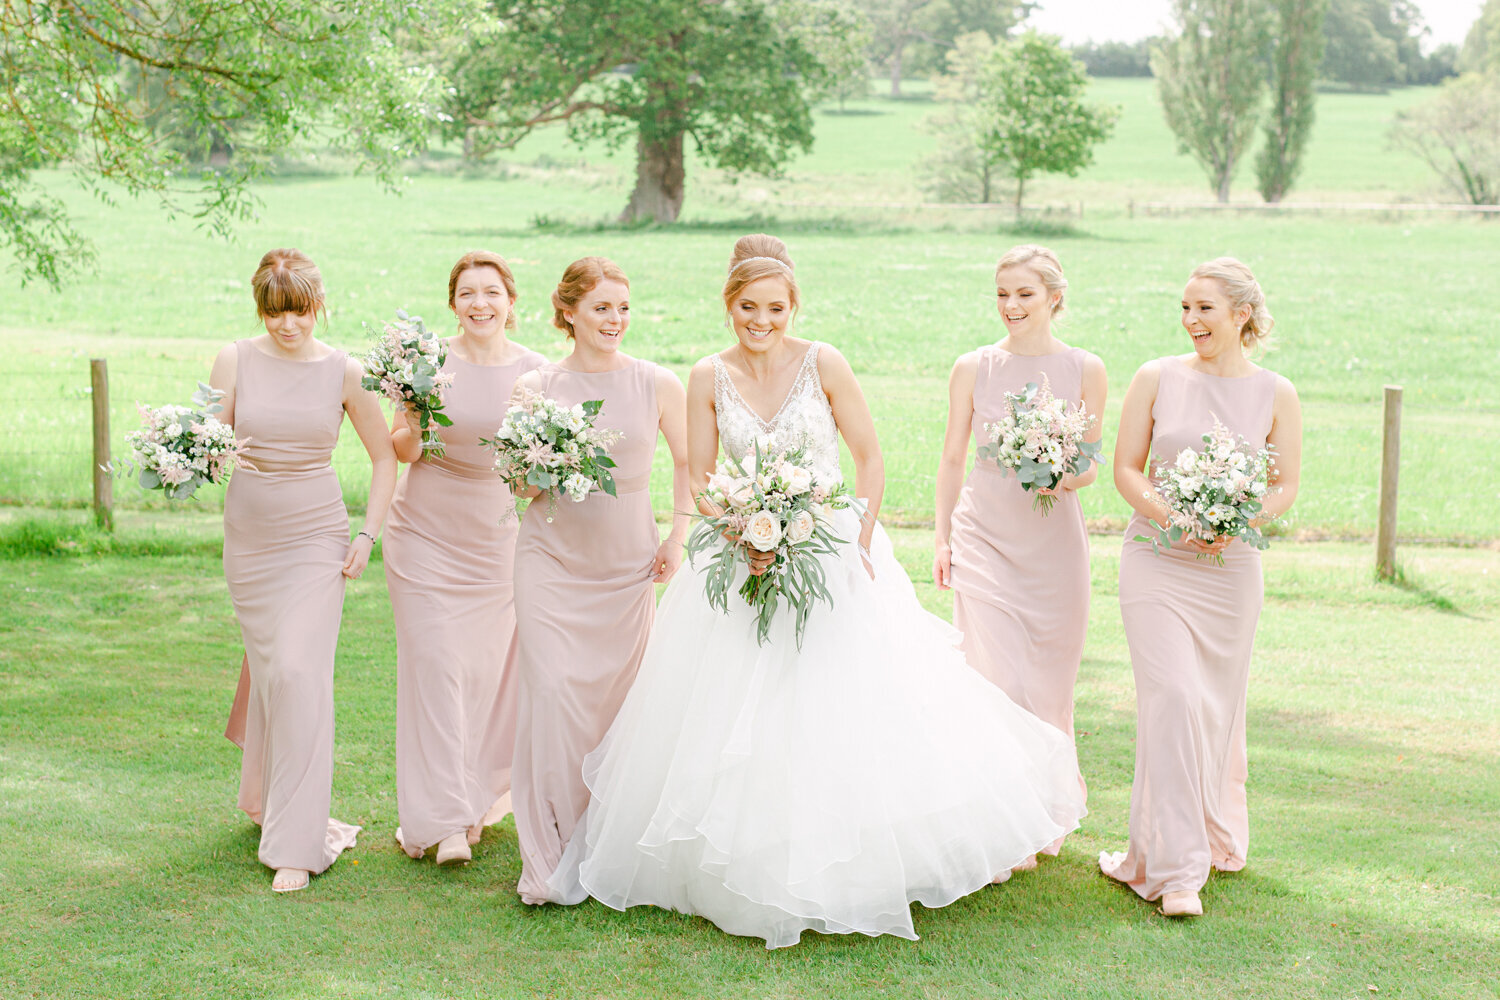 Fine Art Bride with her Bridesmaids walking to the wedding reception. Light and Airy Style Photography